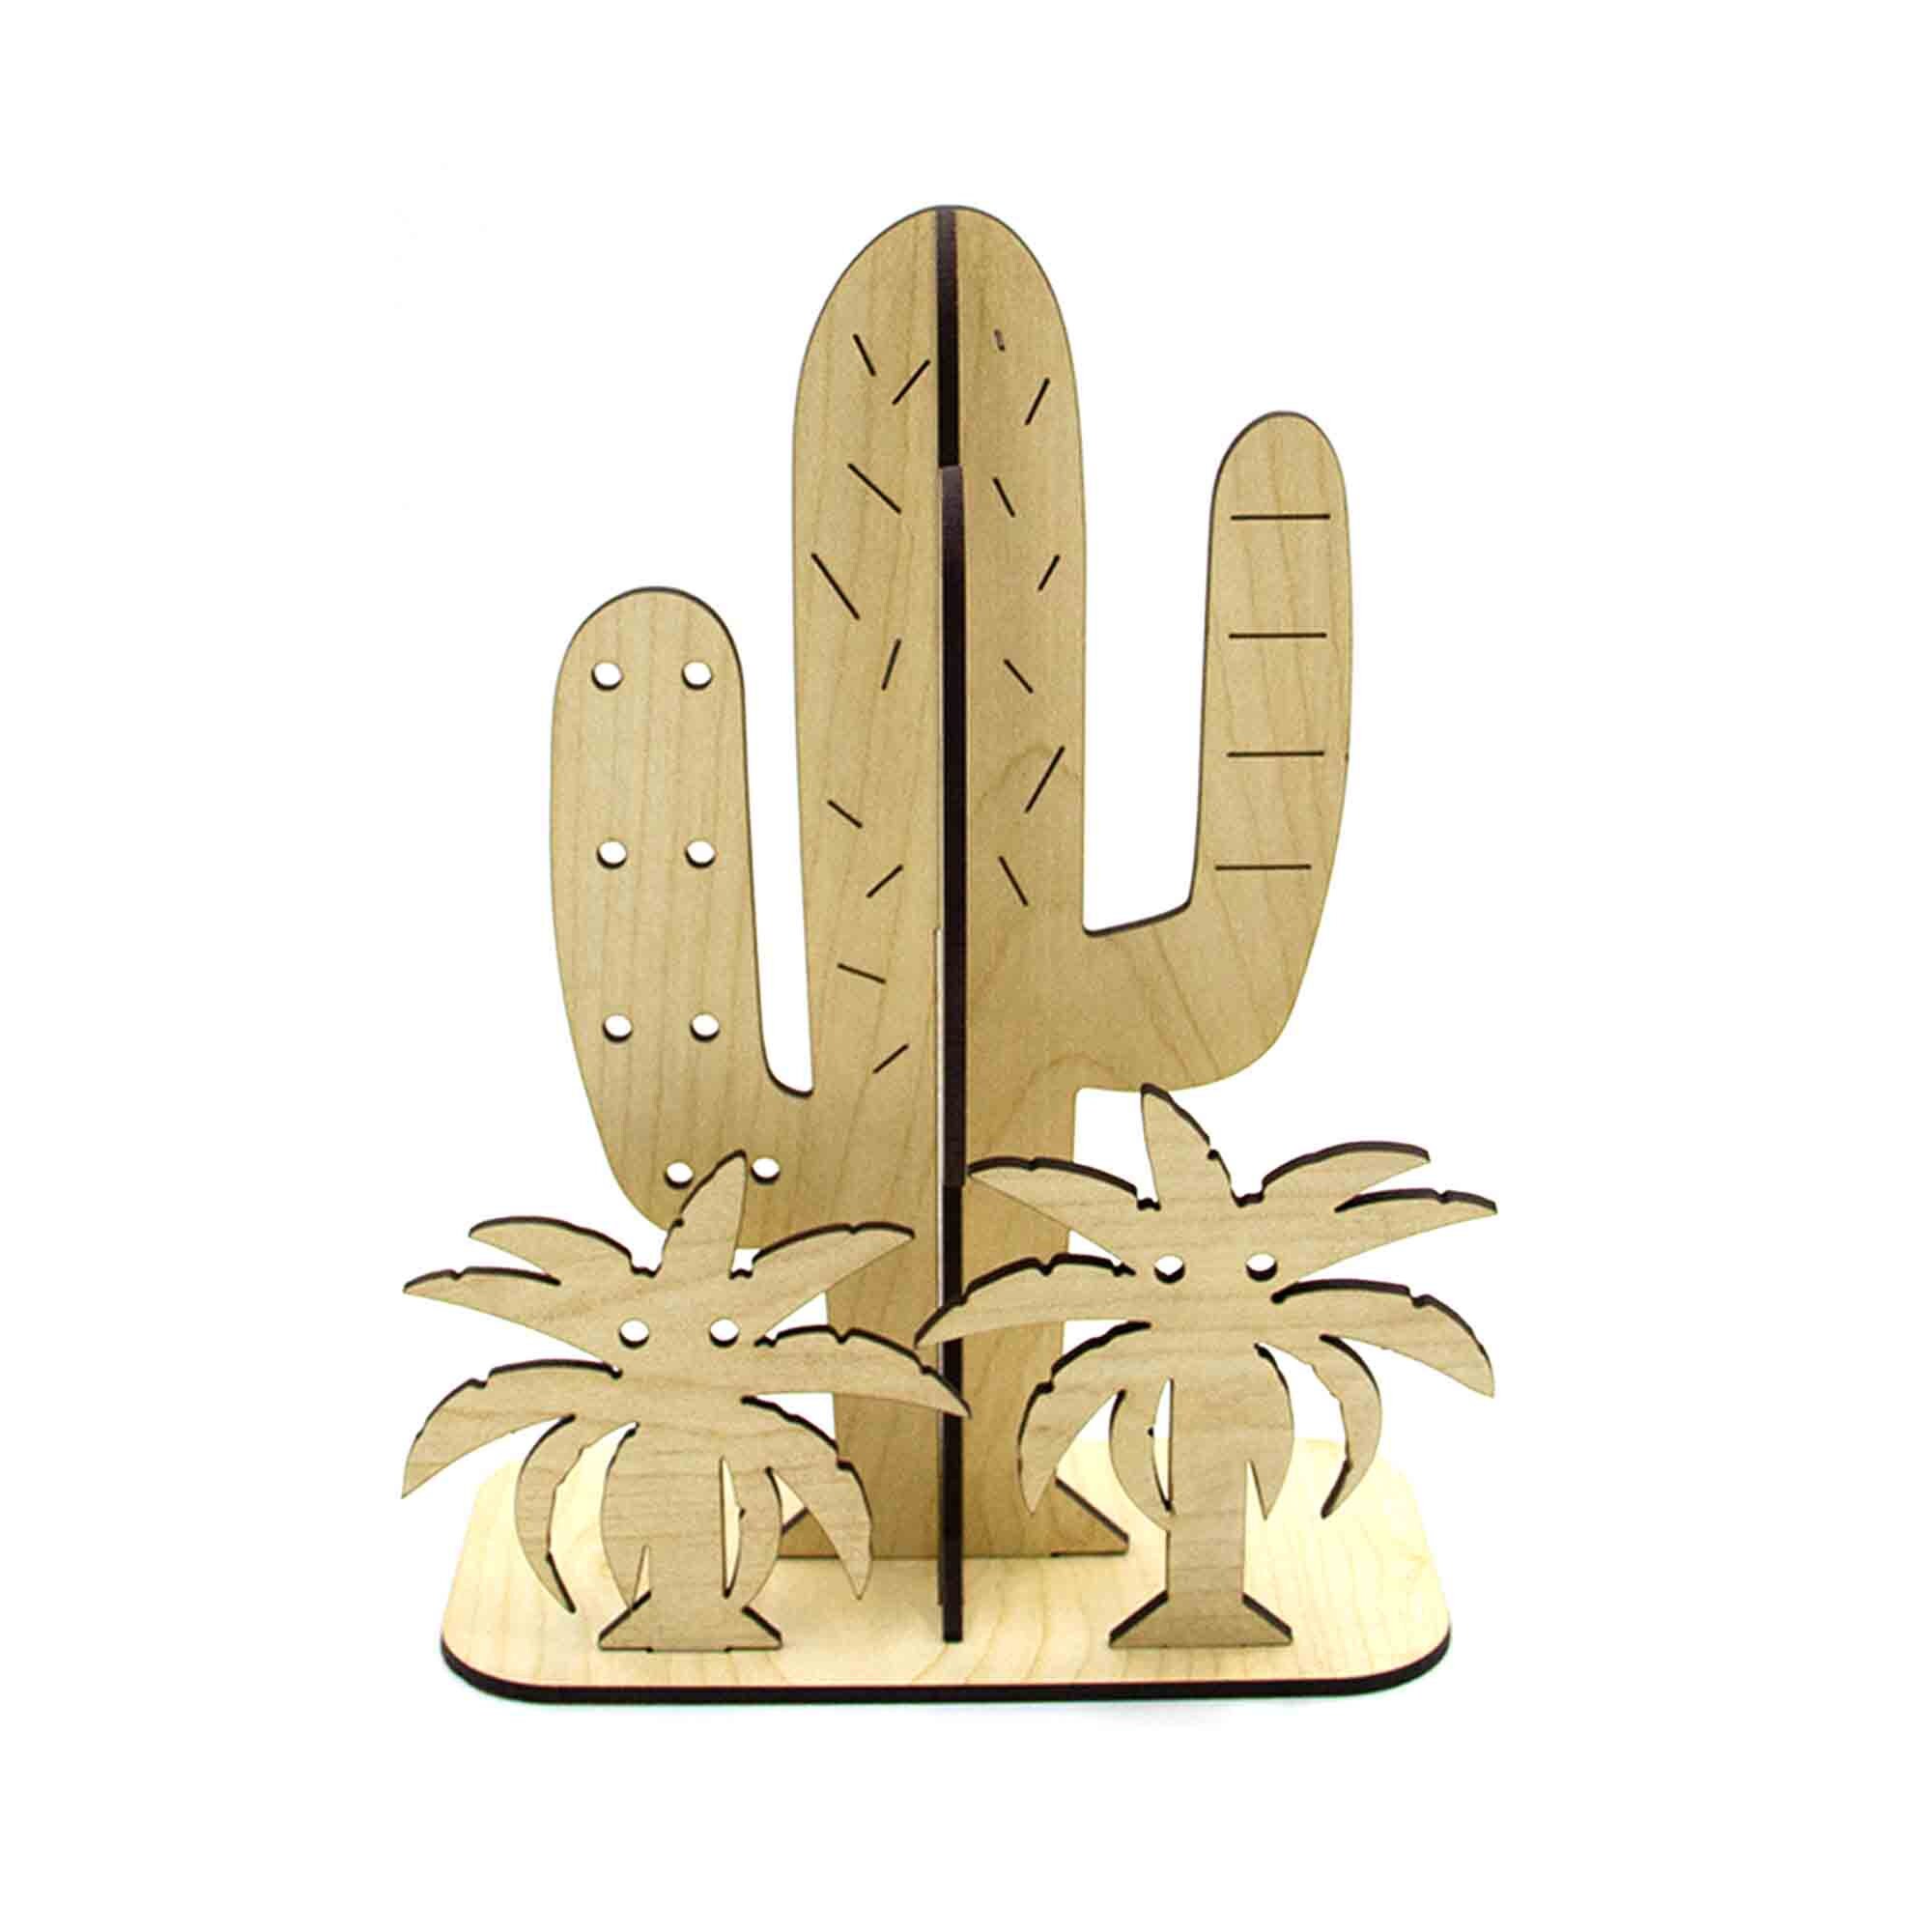 Cactus Jewelry Holder Stand Personalized Wooden Jewelry Stand Organizer,  Earrings Organizer, Bracelet Stand, Nightstand Jewelry Display 